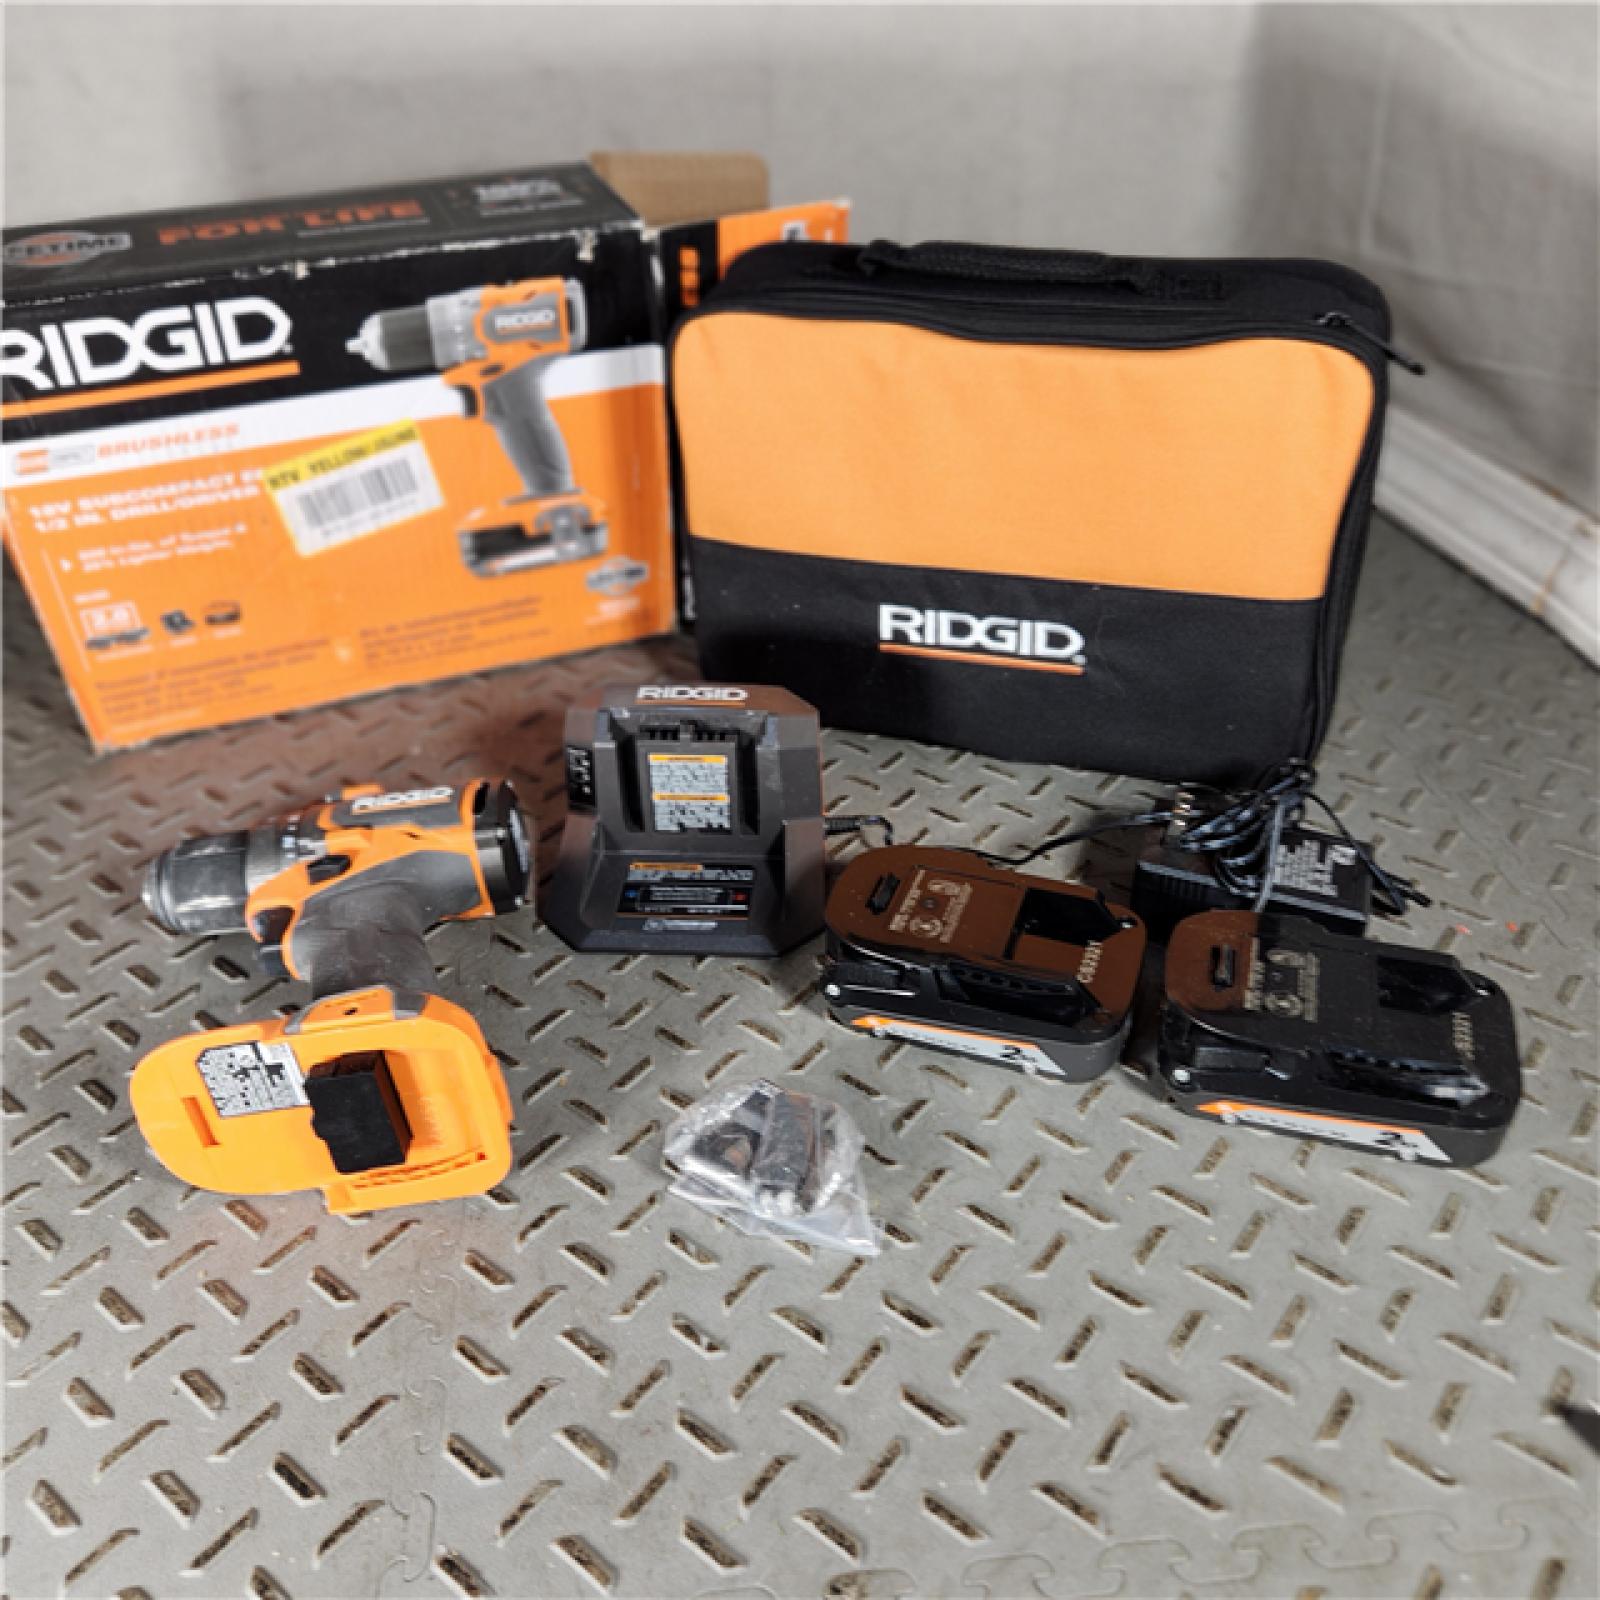 Houston Location - AS-IS RIDGID 18V SubCompact Brushless Cordless 1/2 in. Drill/Driver Kit with (2) 2.0 Ah Batteries, Charger, and Tool Bag - Appears IN NEW Condition